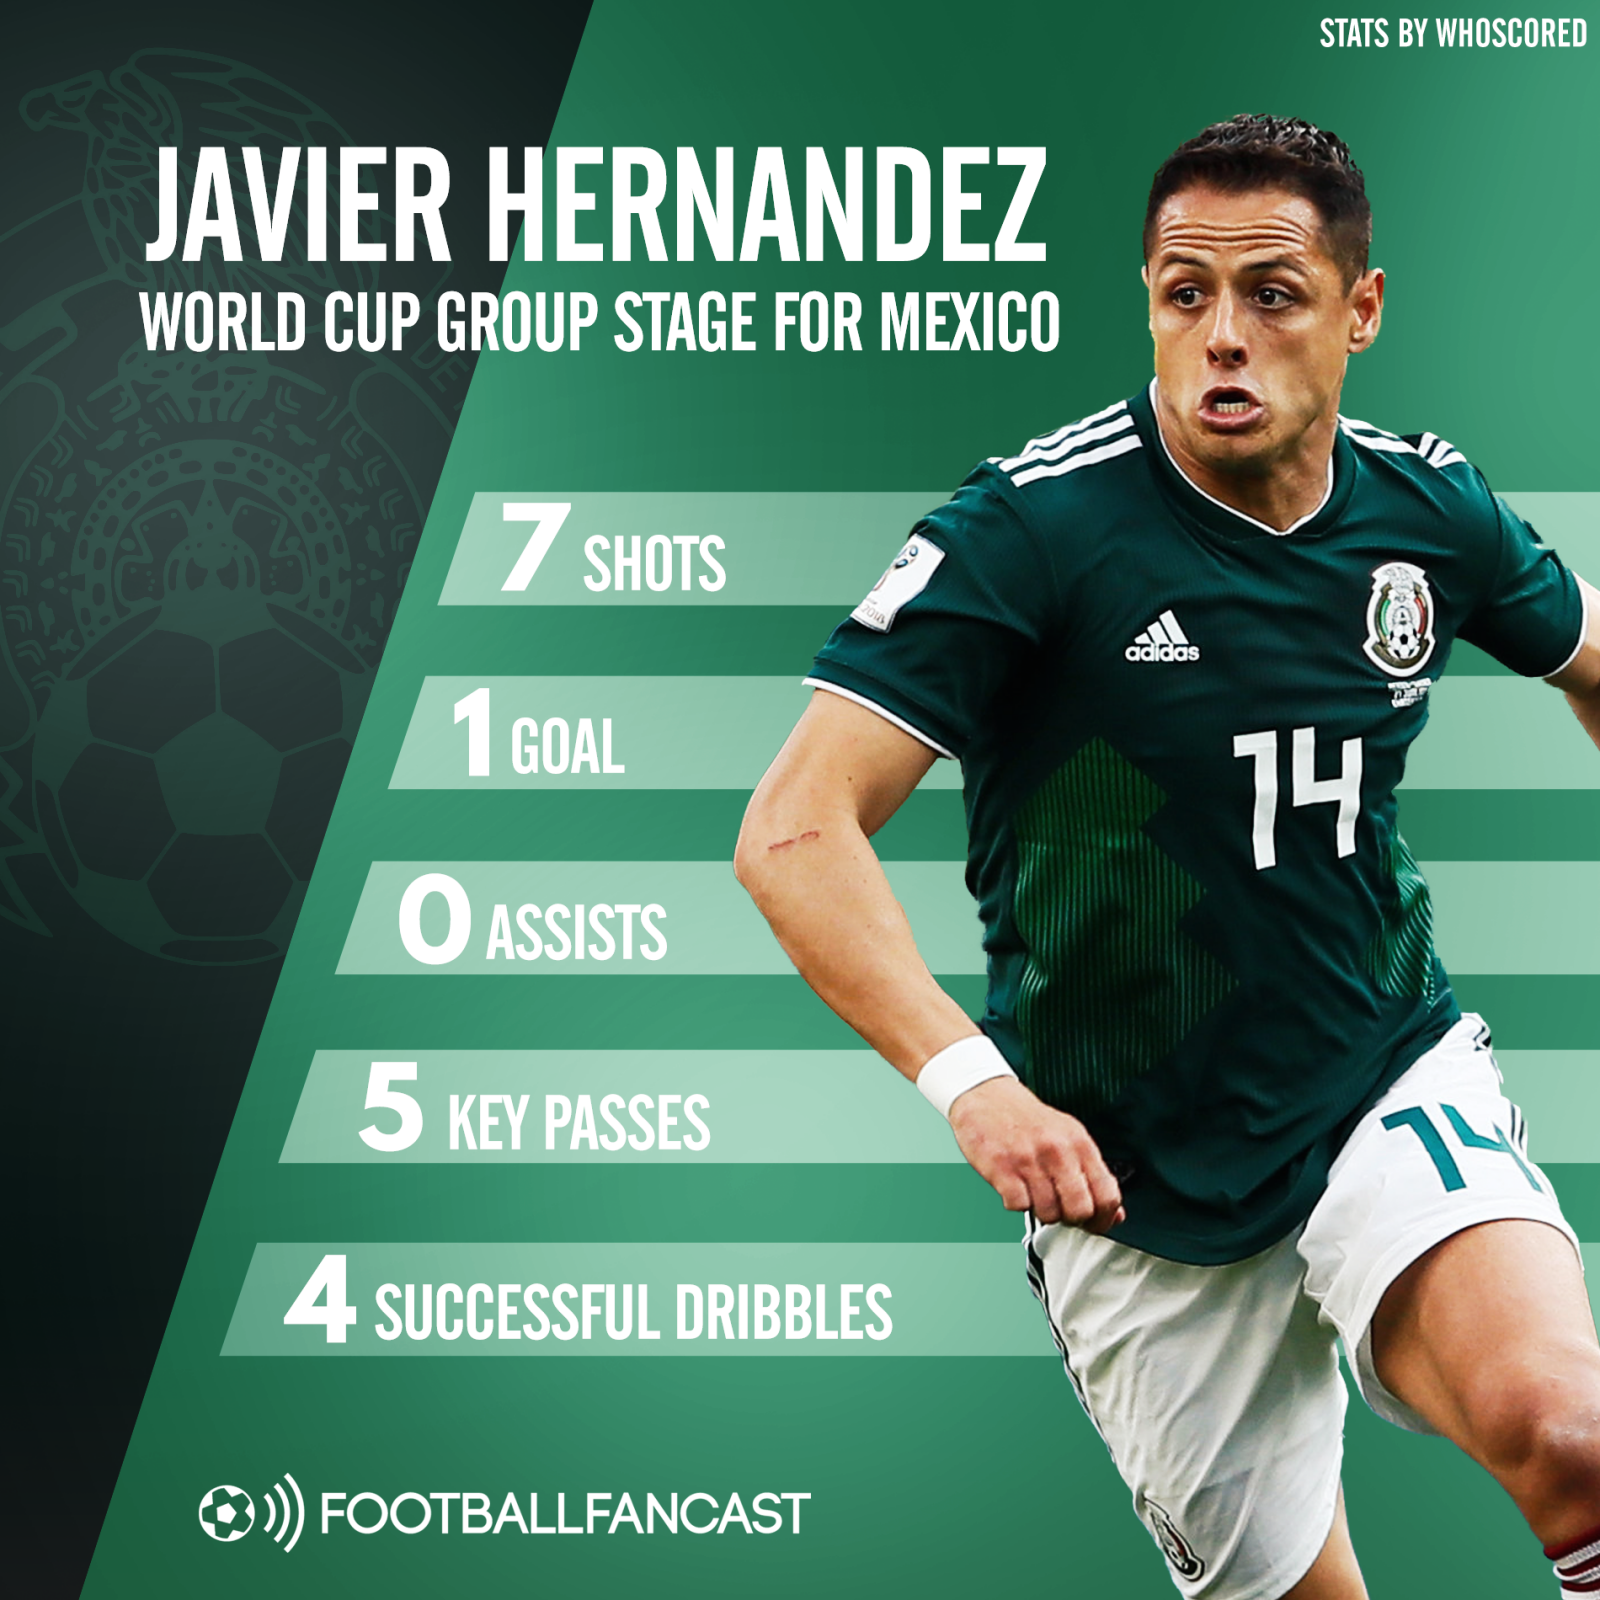 Javier Hernandez group stage stats for Mexico